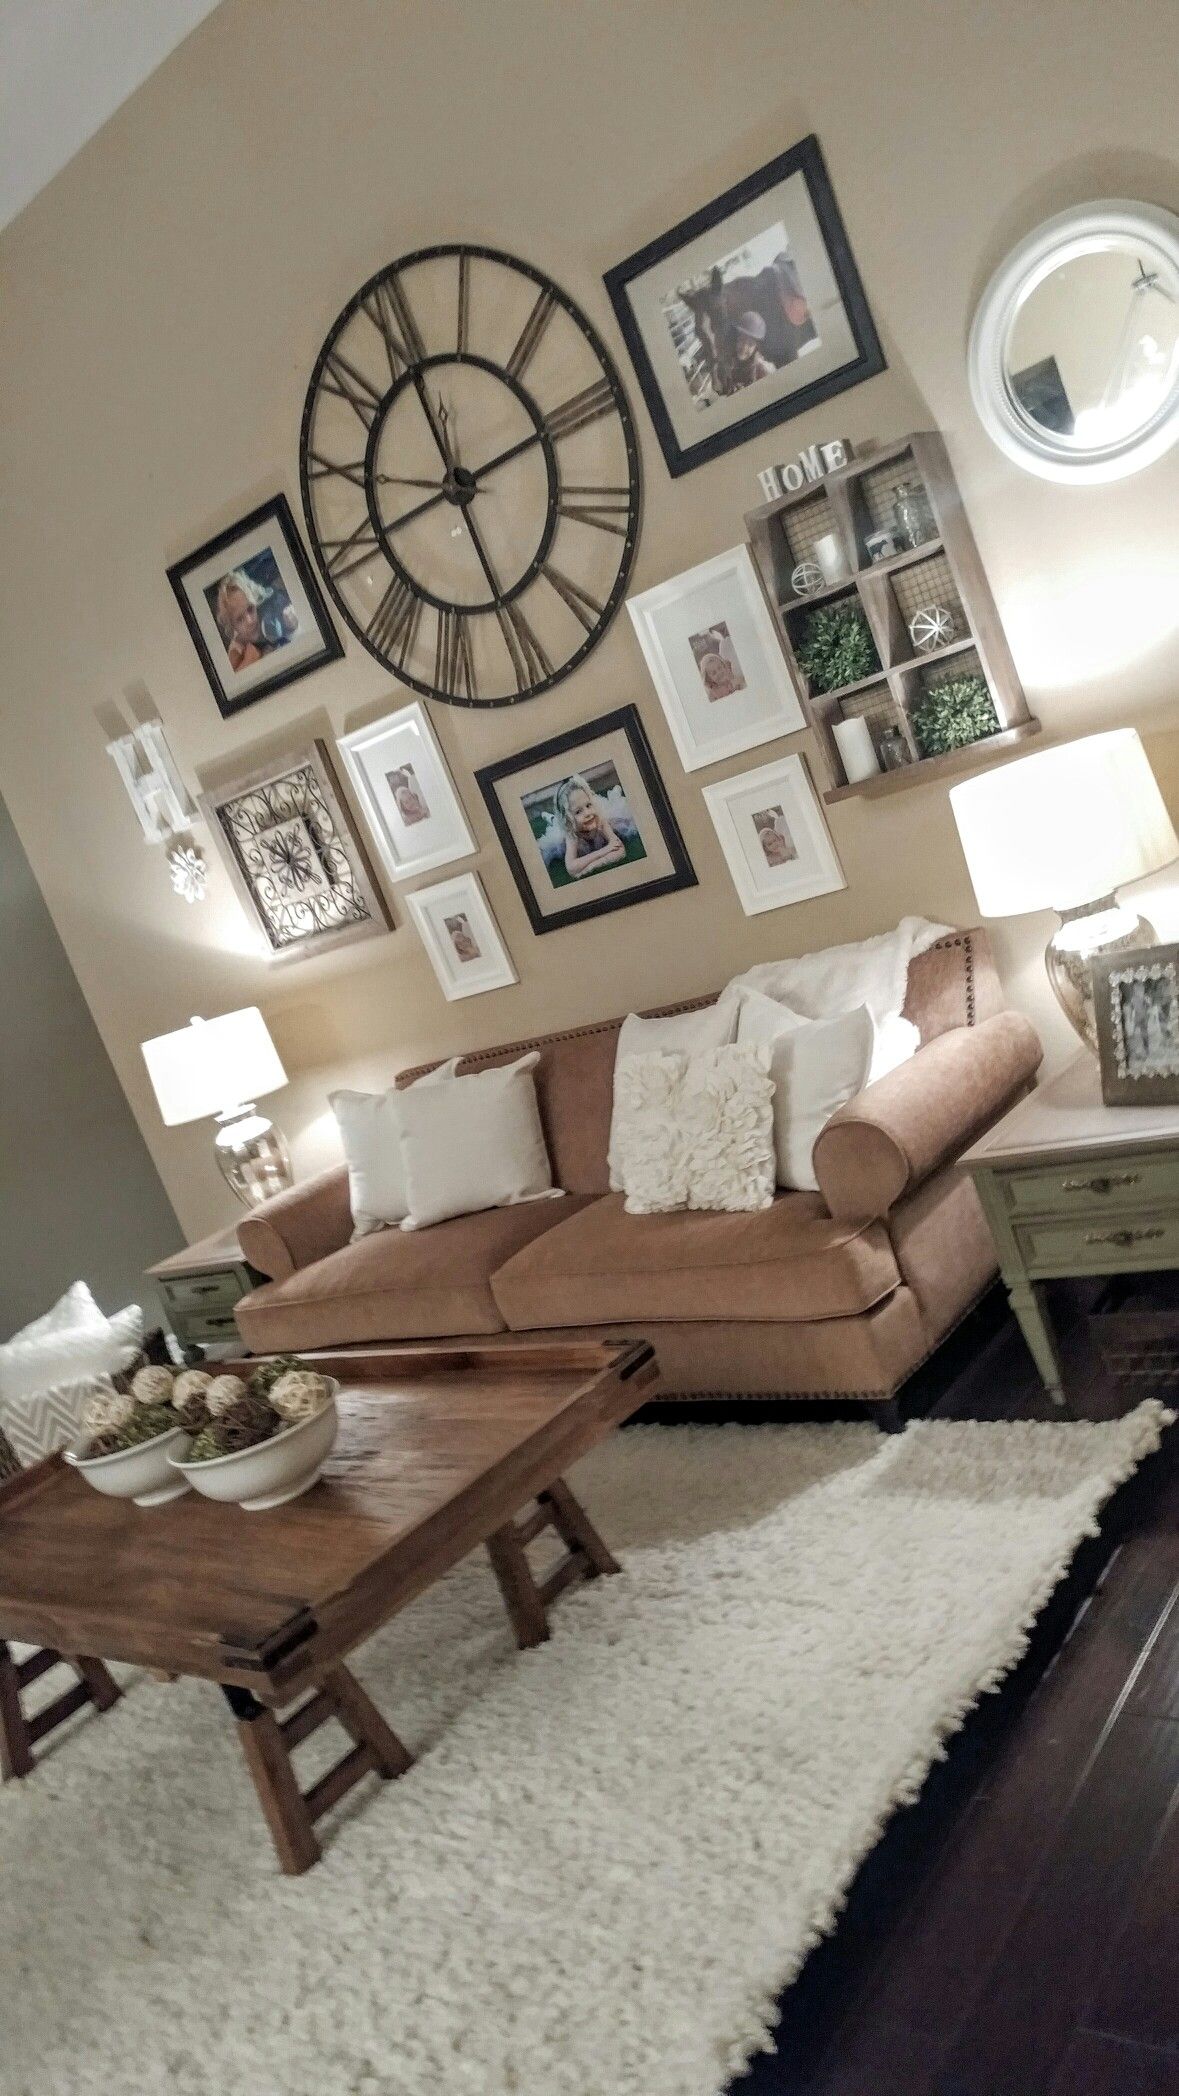 Collage wall | Wall decor living room rustic, Family room walls, Wall